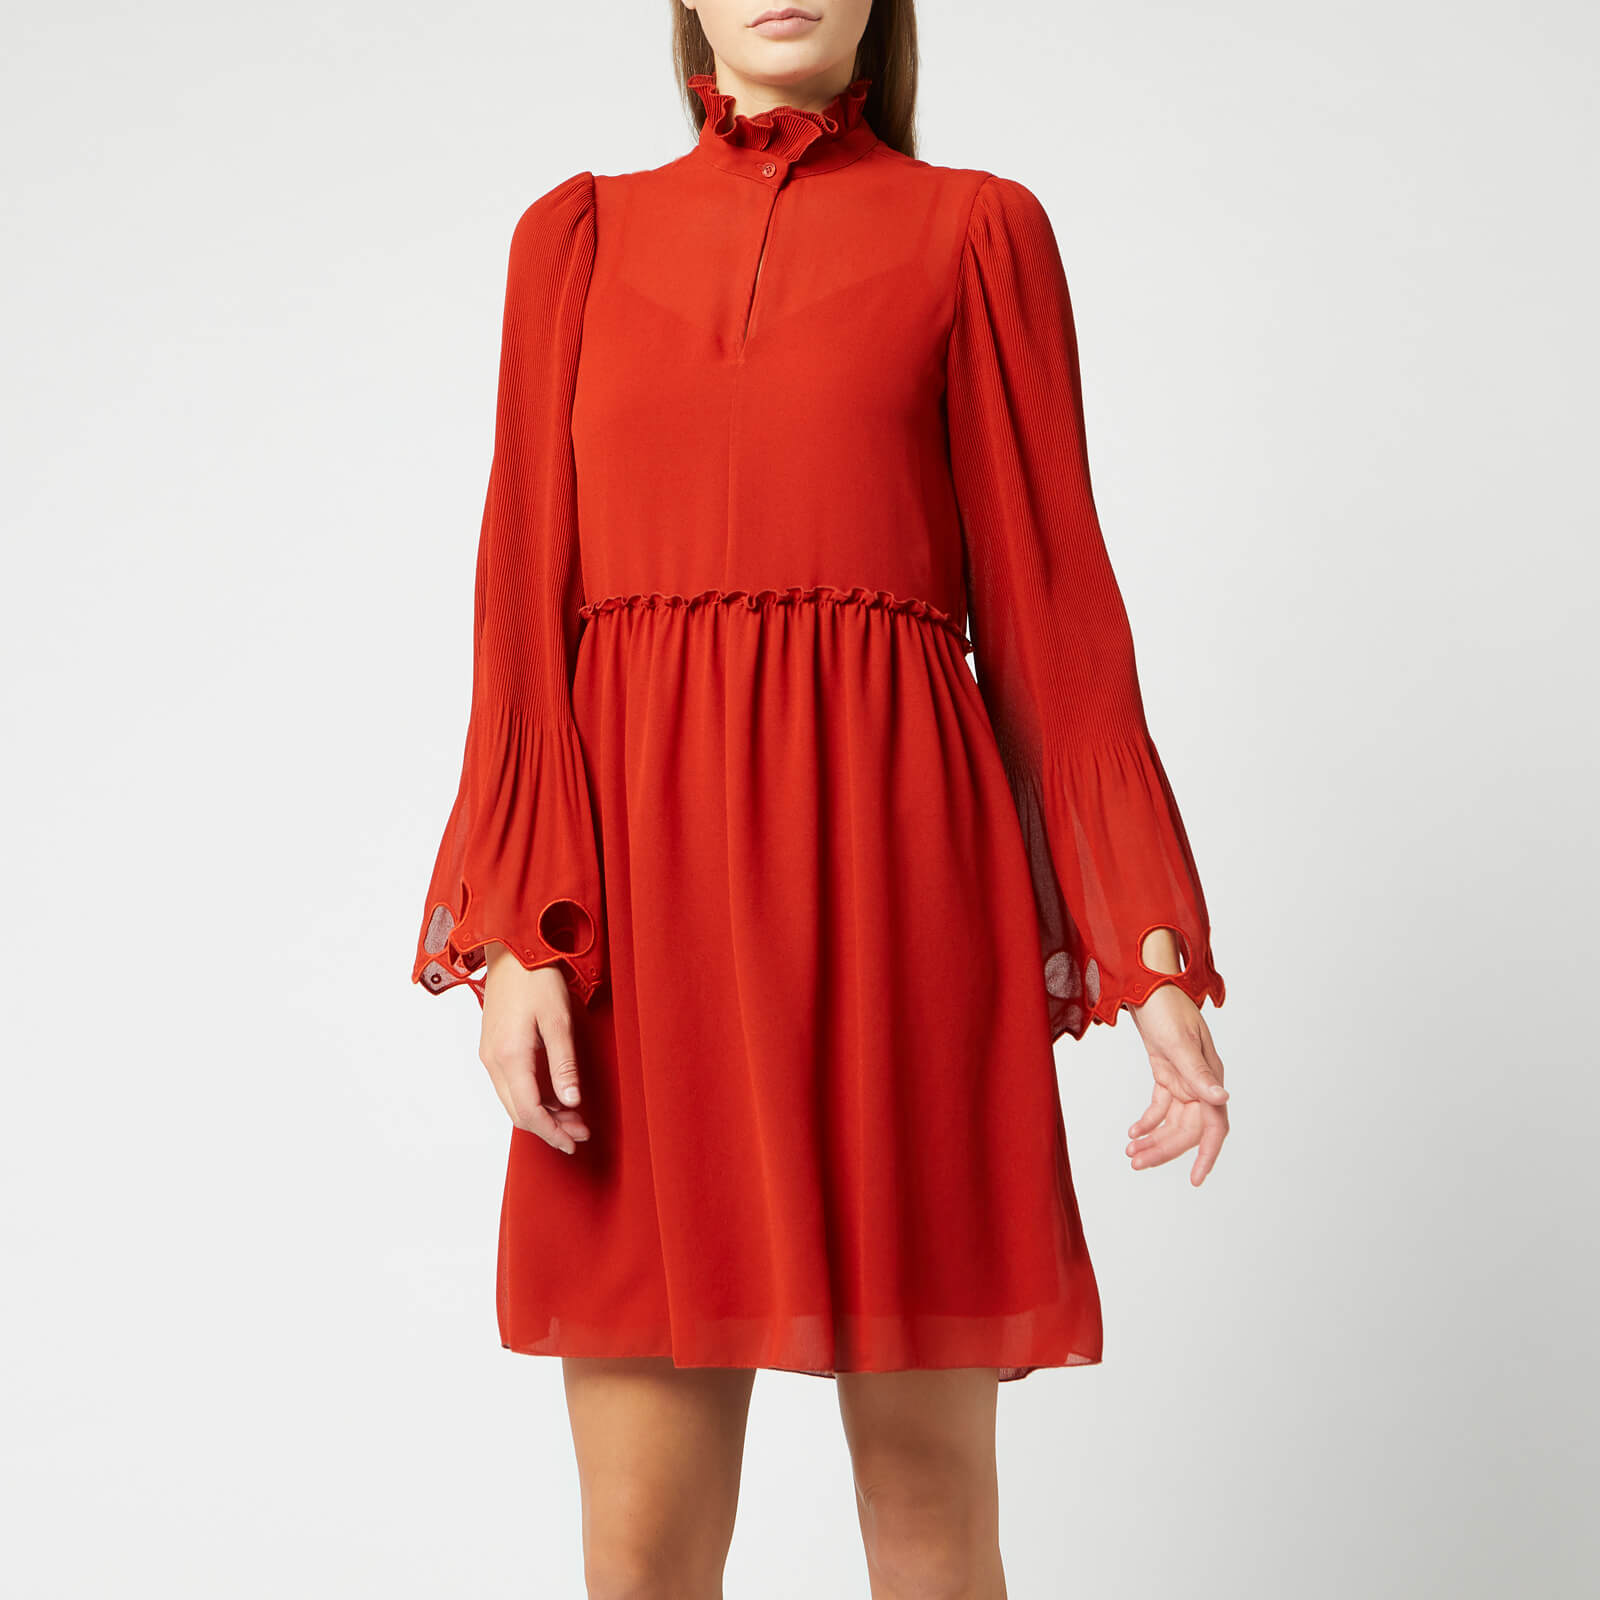 Frill Detail Dress - Earthy Red 